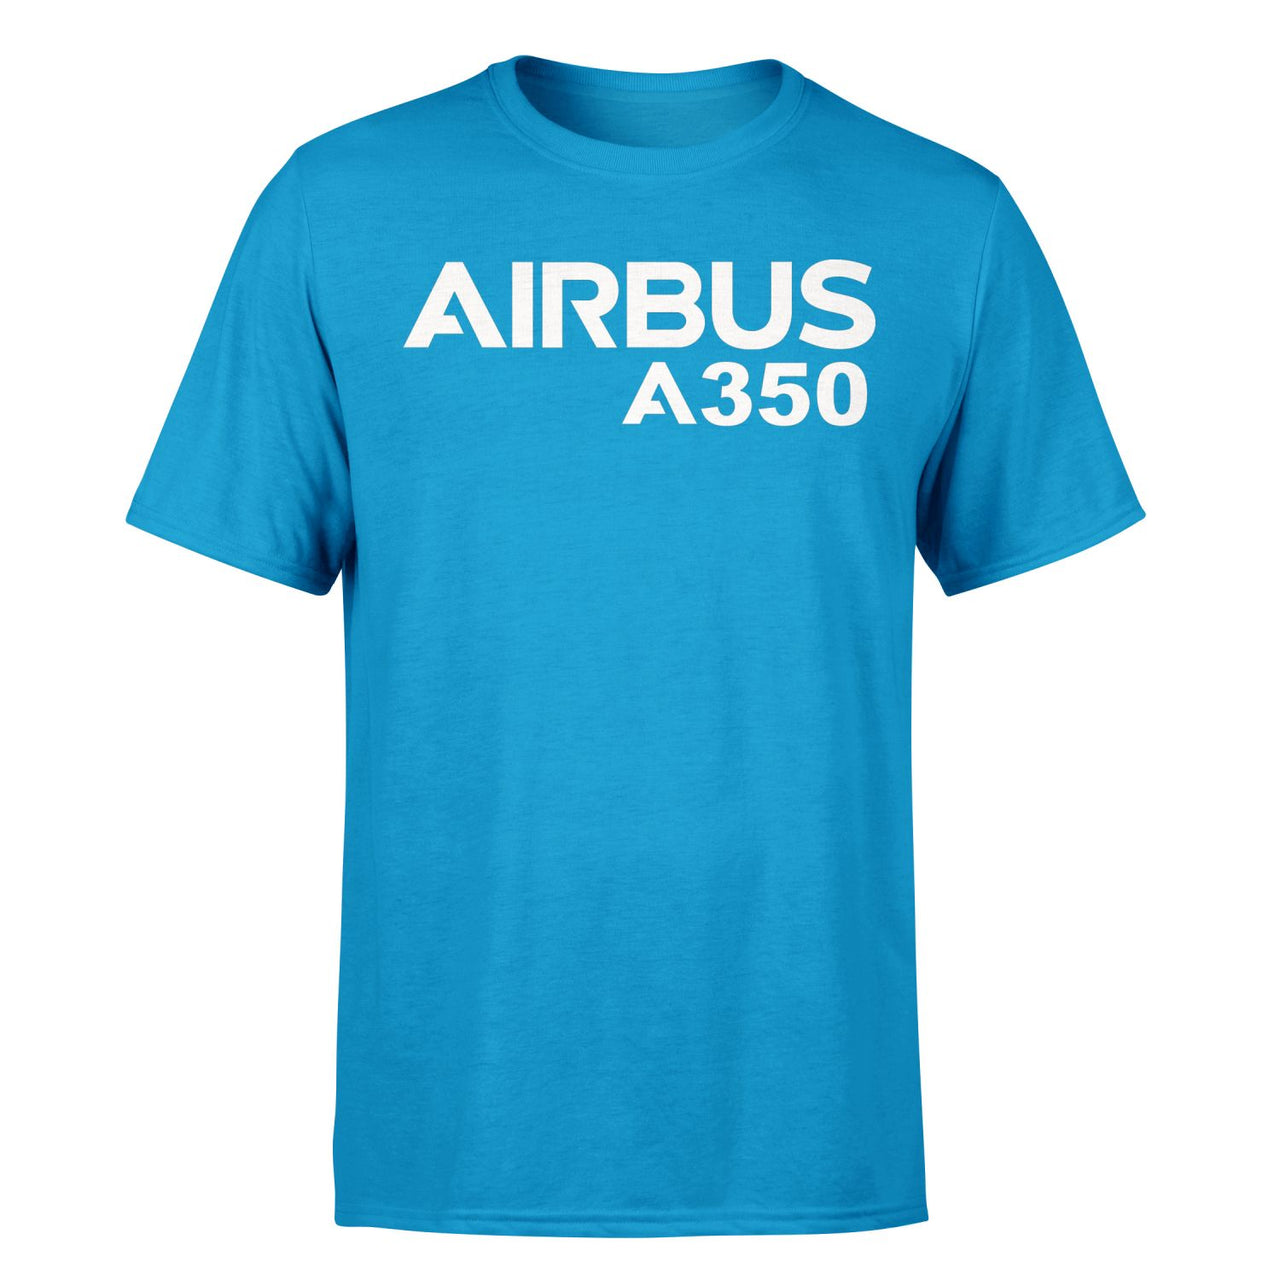 Airbus A350 & Text Designed T-Shirts